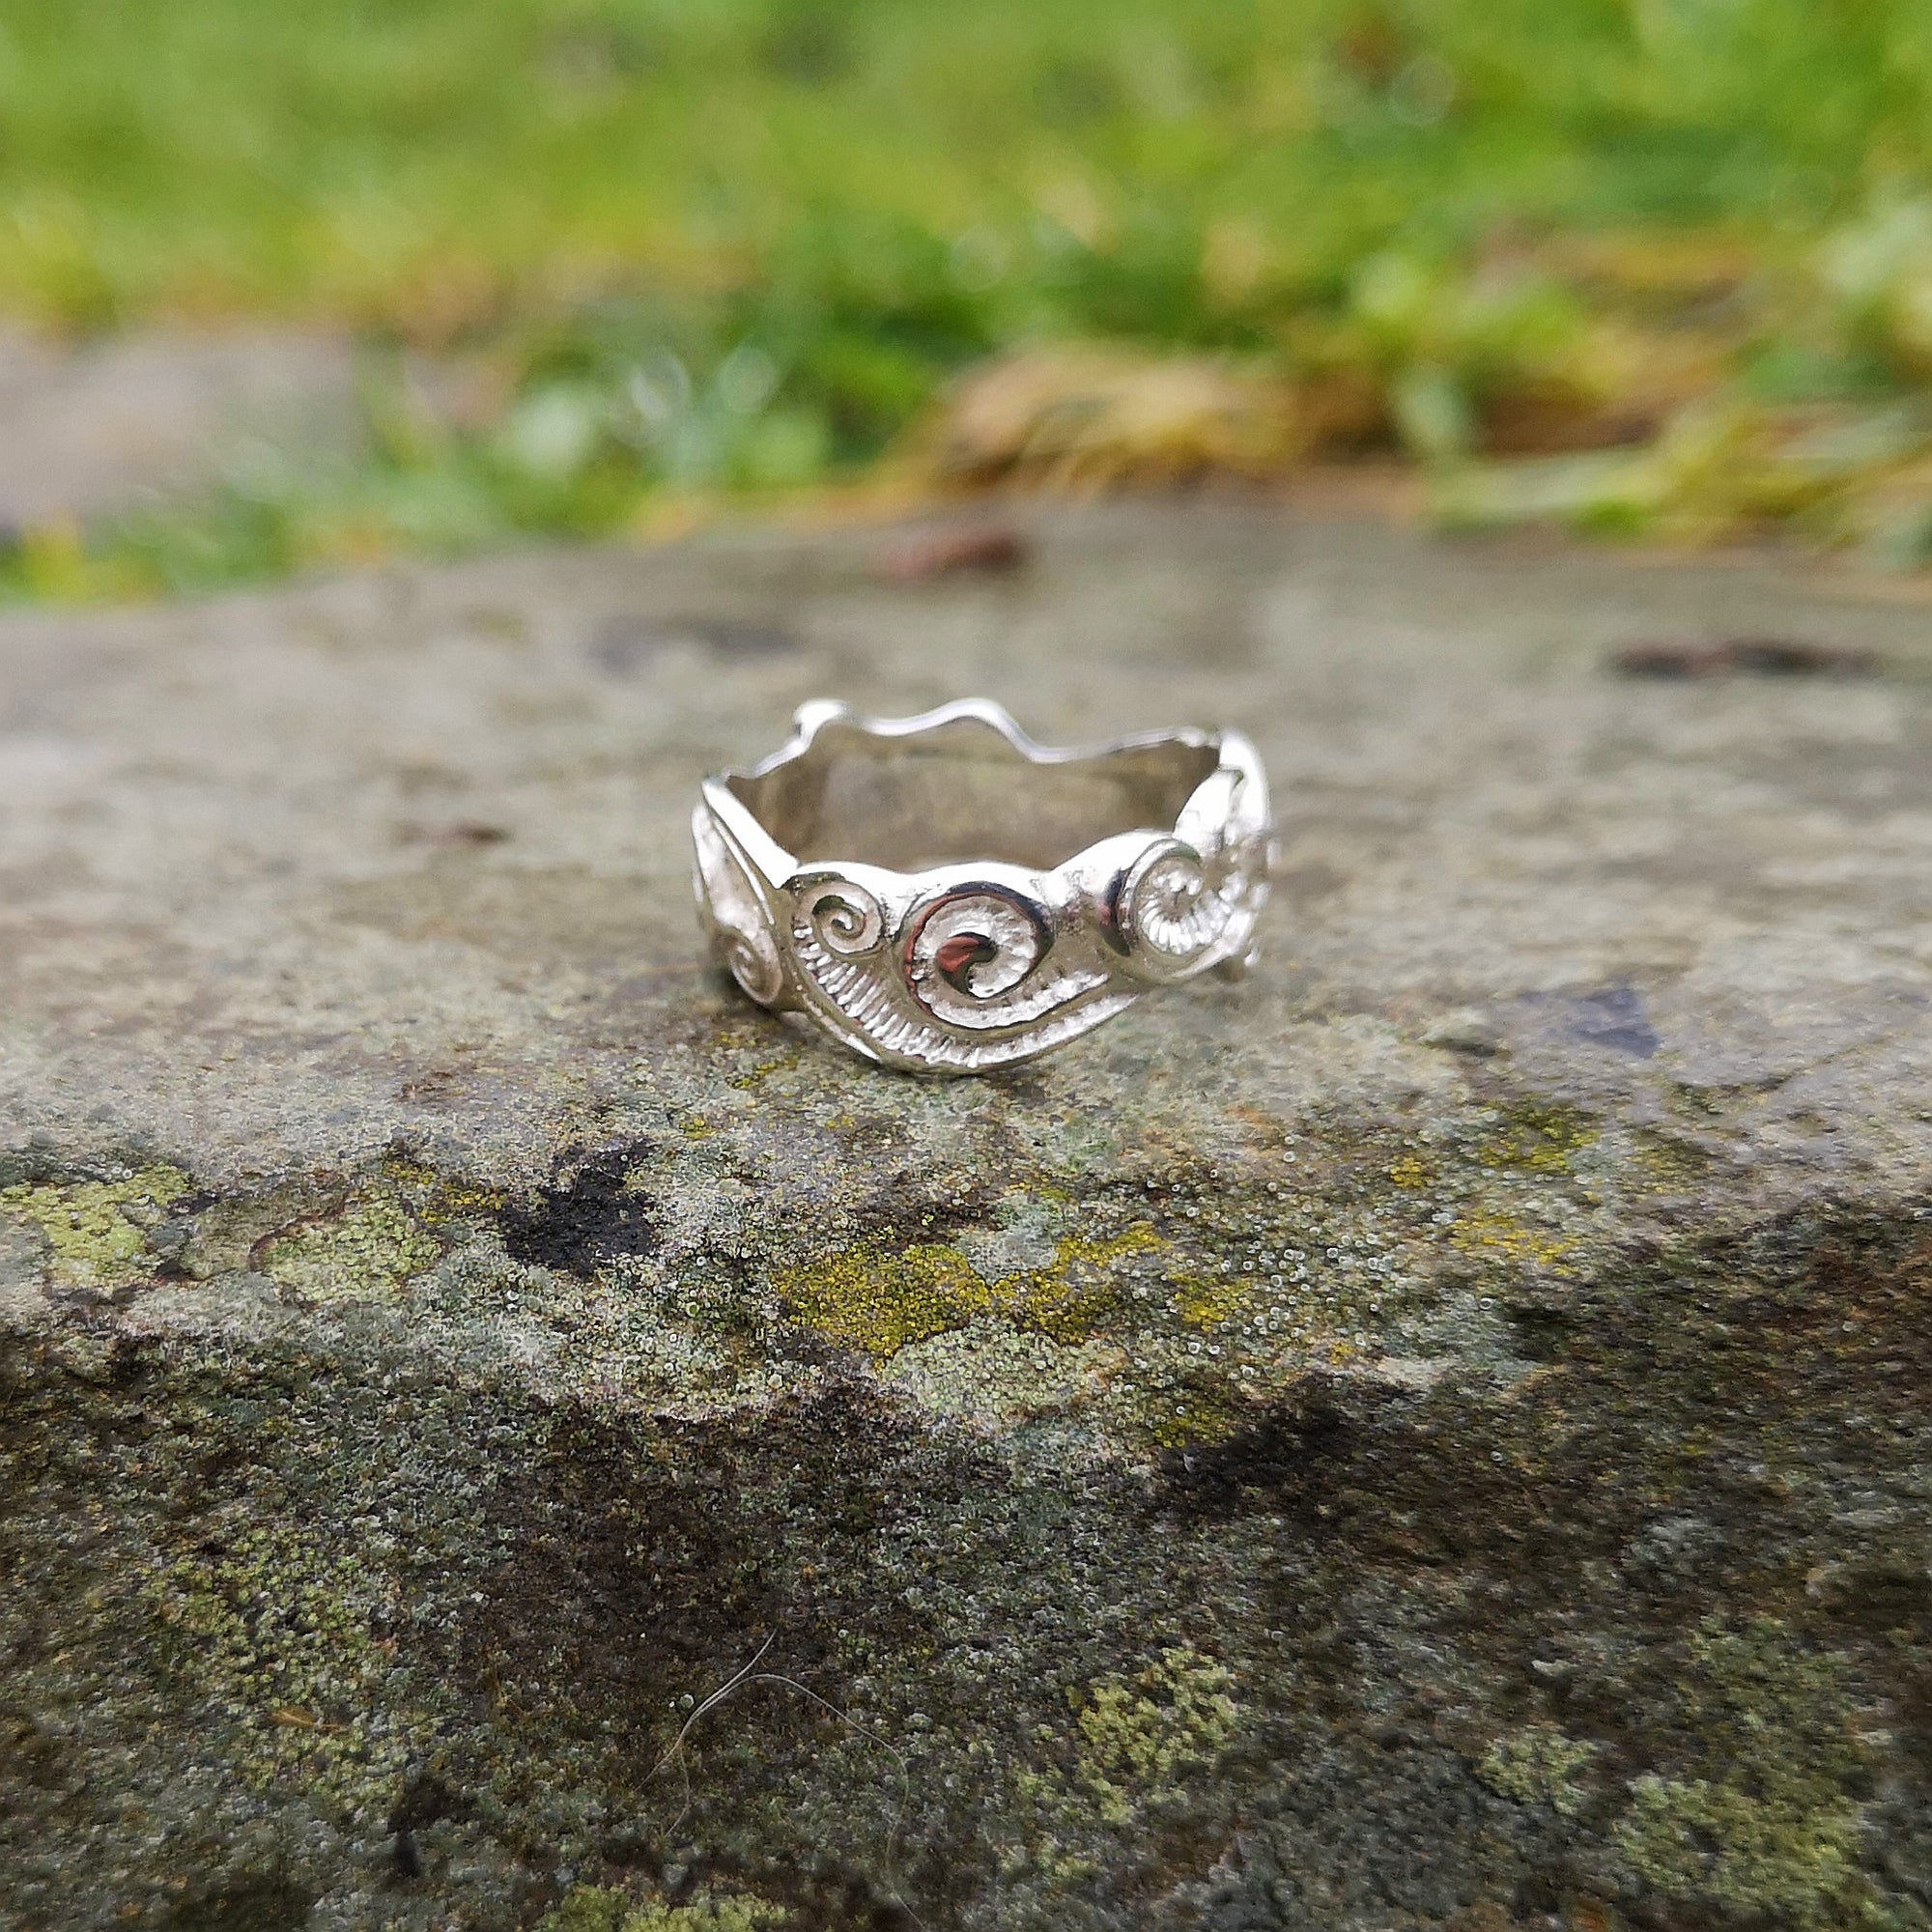 The sterling silver Celtic Spirals Wedding Ring is an Irish wedding ring and is perched on a smooth rock outside. This Irish wedding ring is handmade in Ireland by Elena Brennan.